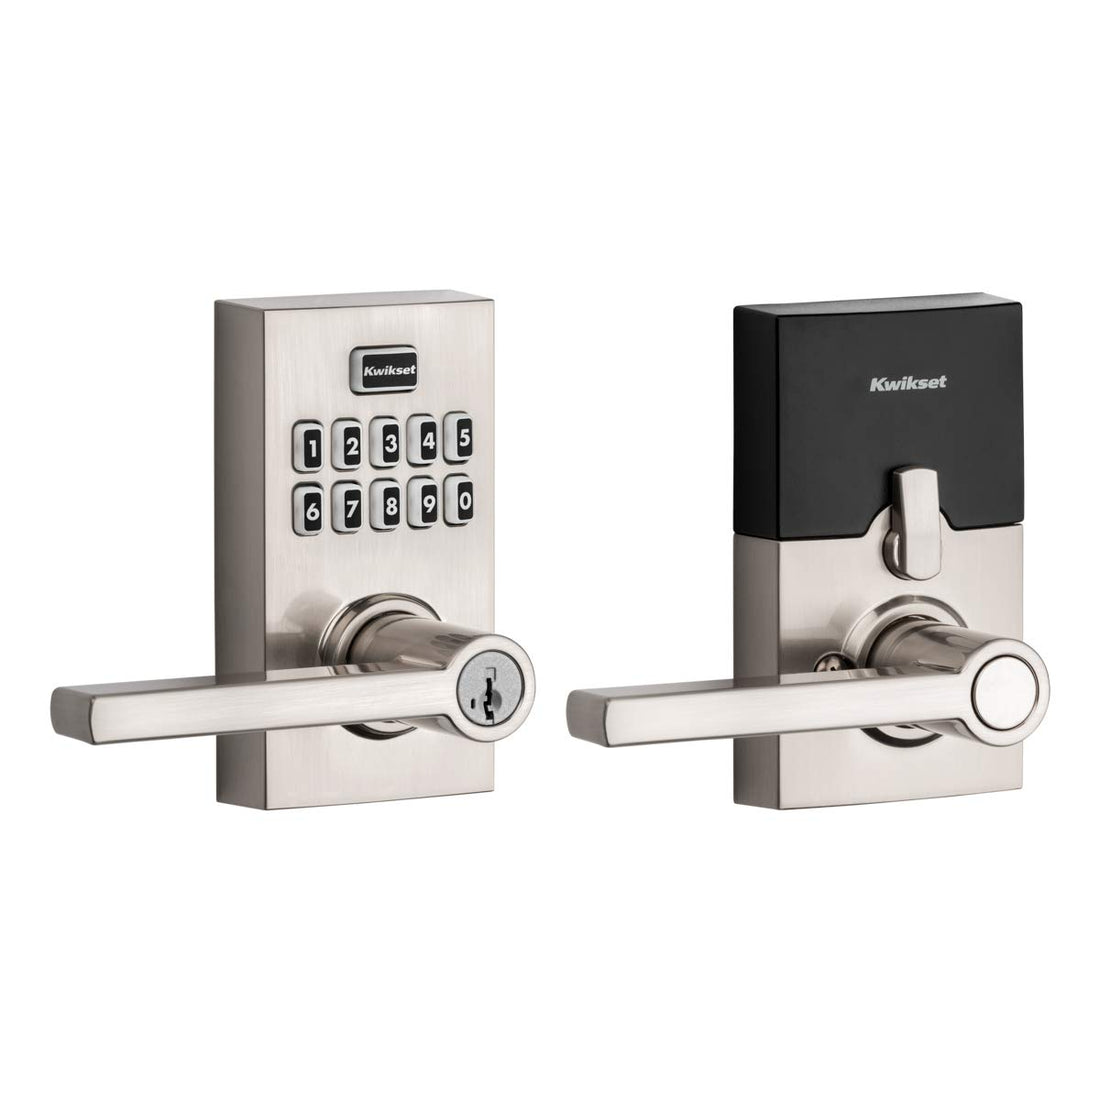 Kwikset 99170-003 SmartCode 917 Keypad Keyless Entry Contemporary Residential Electronic Lever Lock Deadbolt Alternative with Halifax Door Handle and SmartKey Security, Satin Nickel